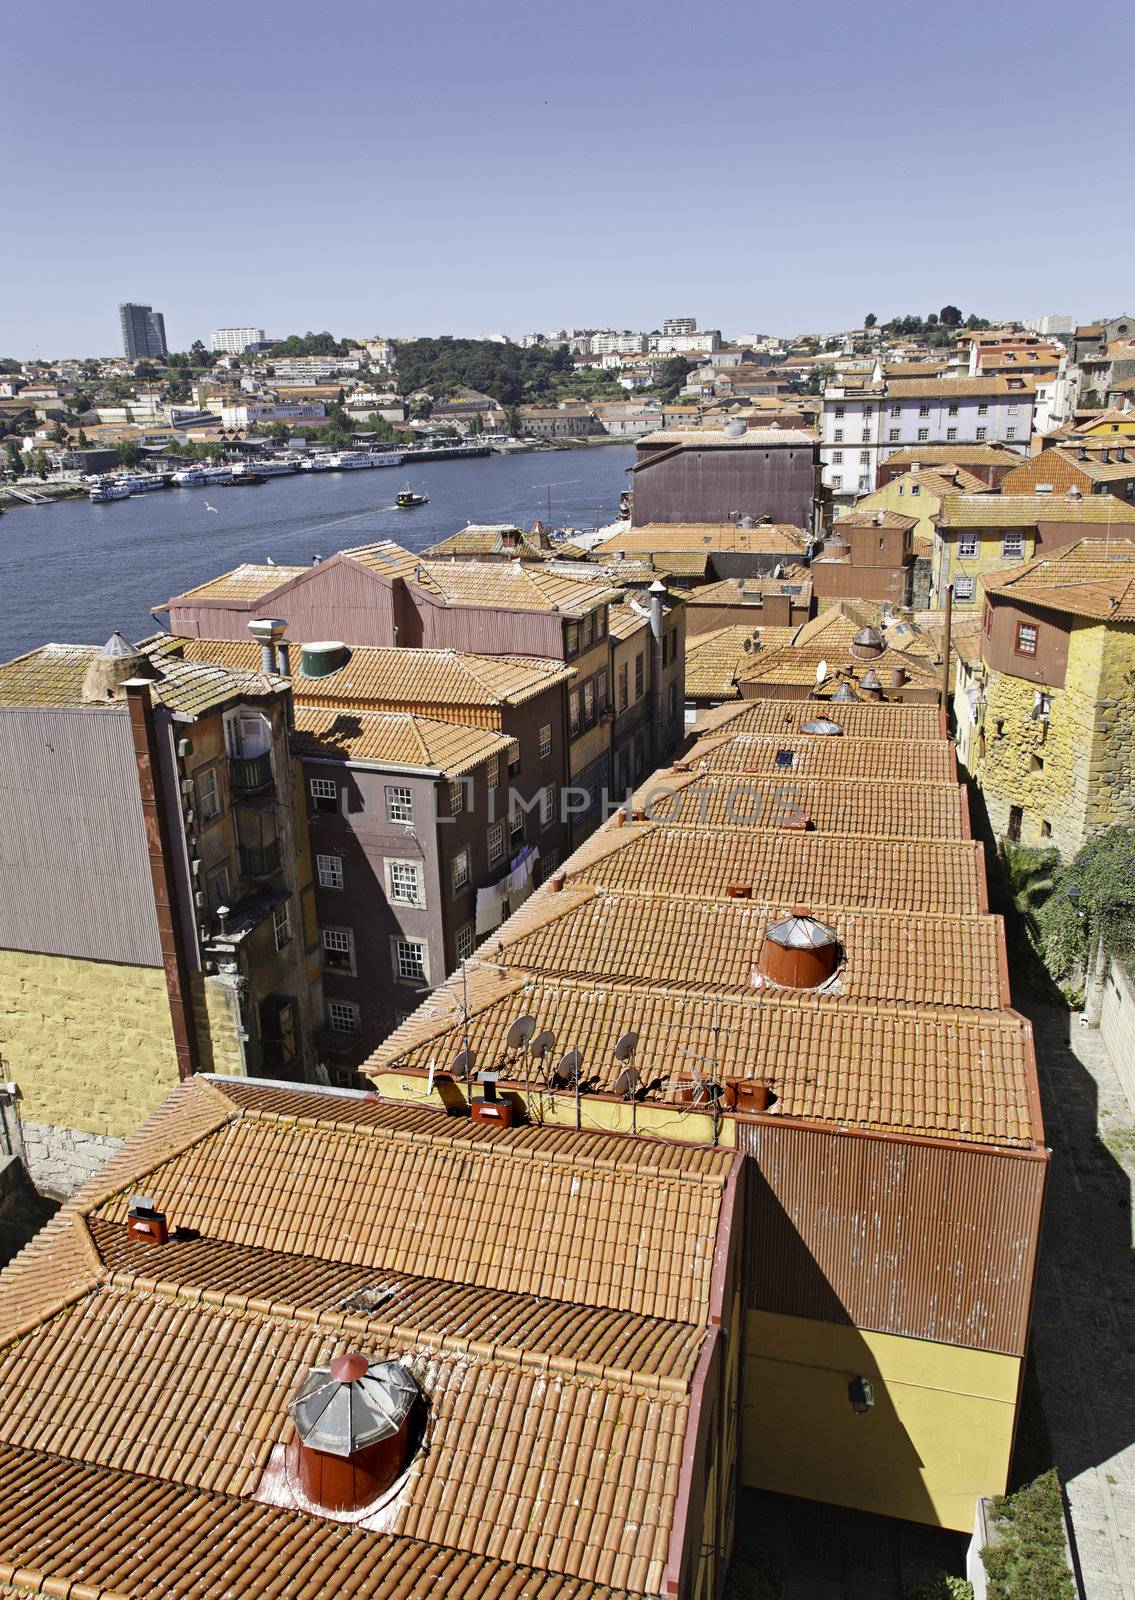 Roofs of Porto, detail from old roofs